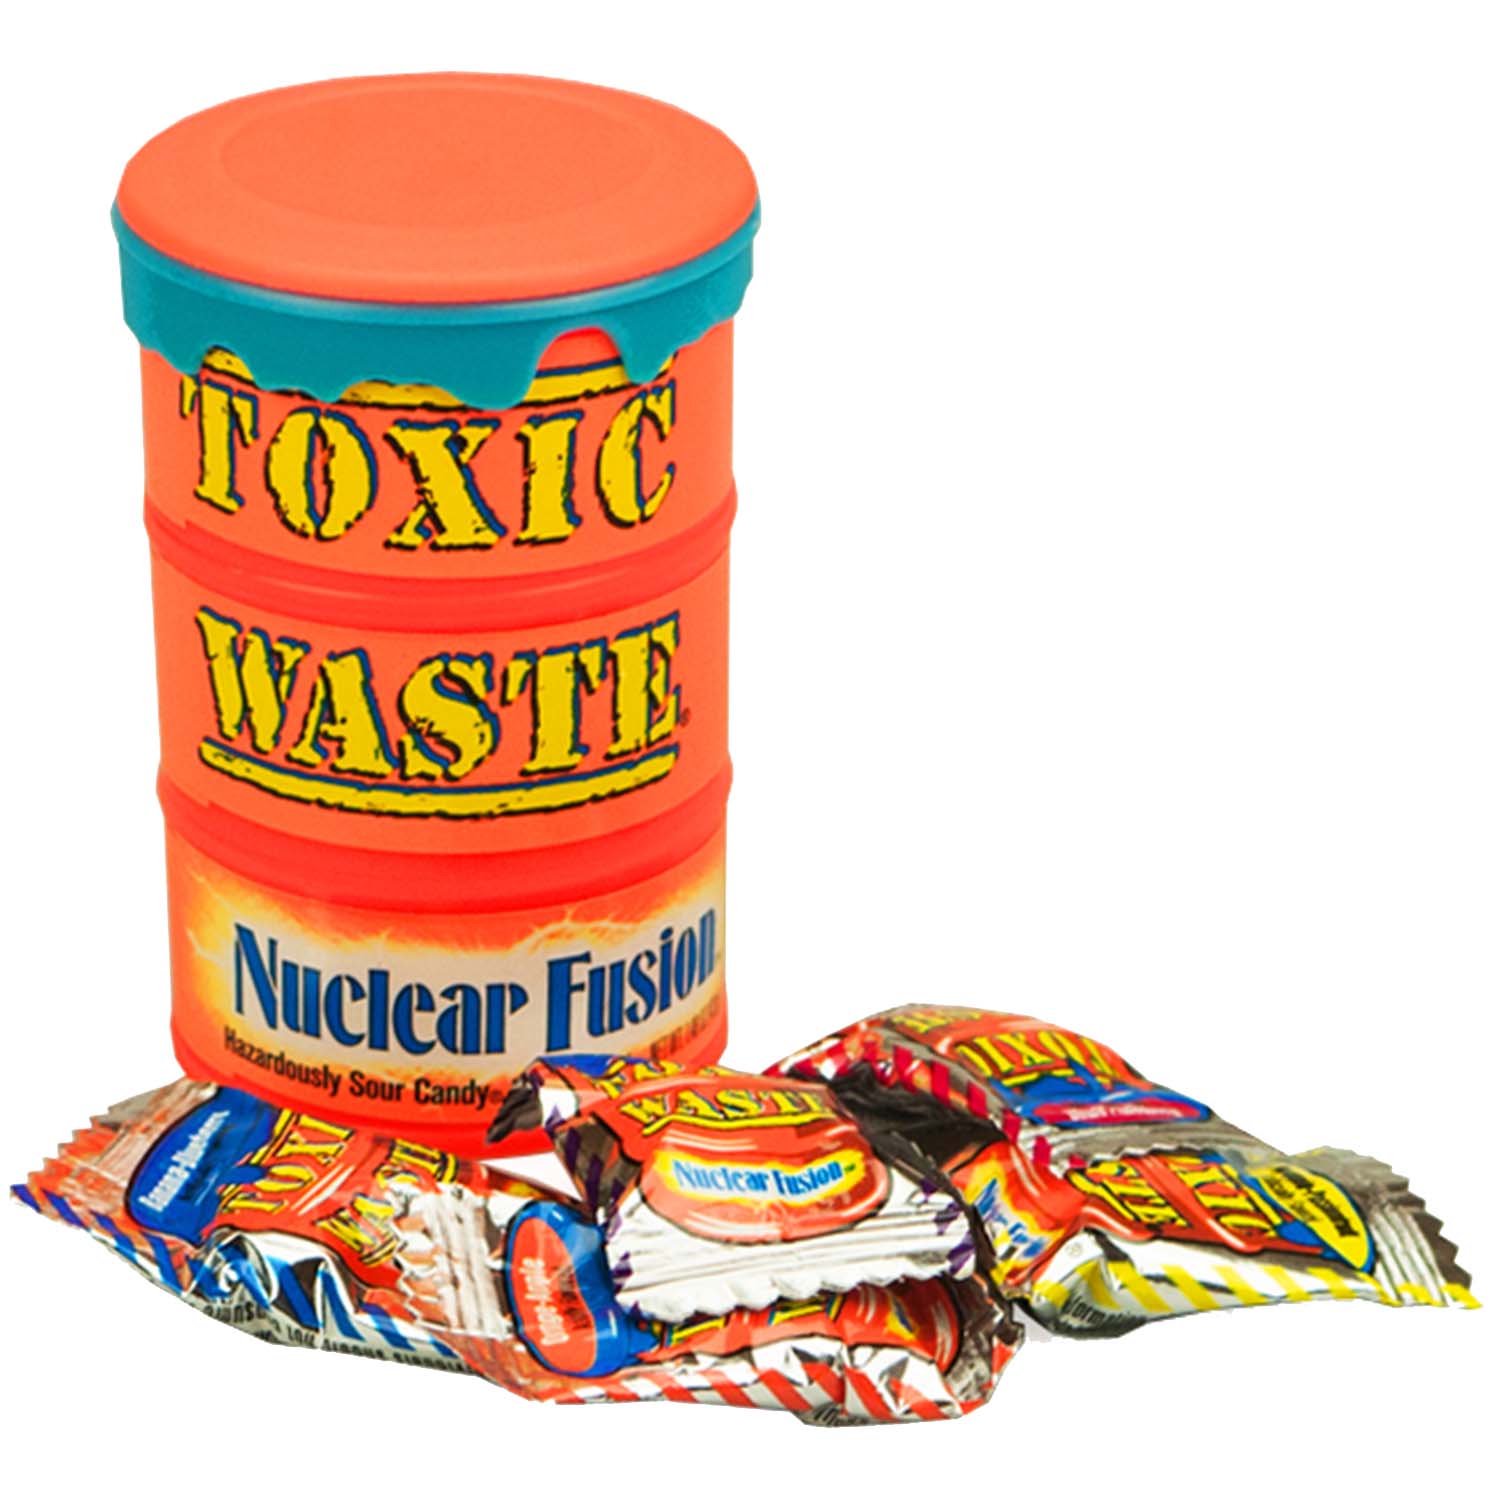 toxic-waste-nuclear-fusion-sour-candy-candy-empire-rotterdam